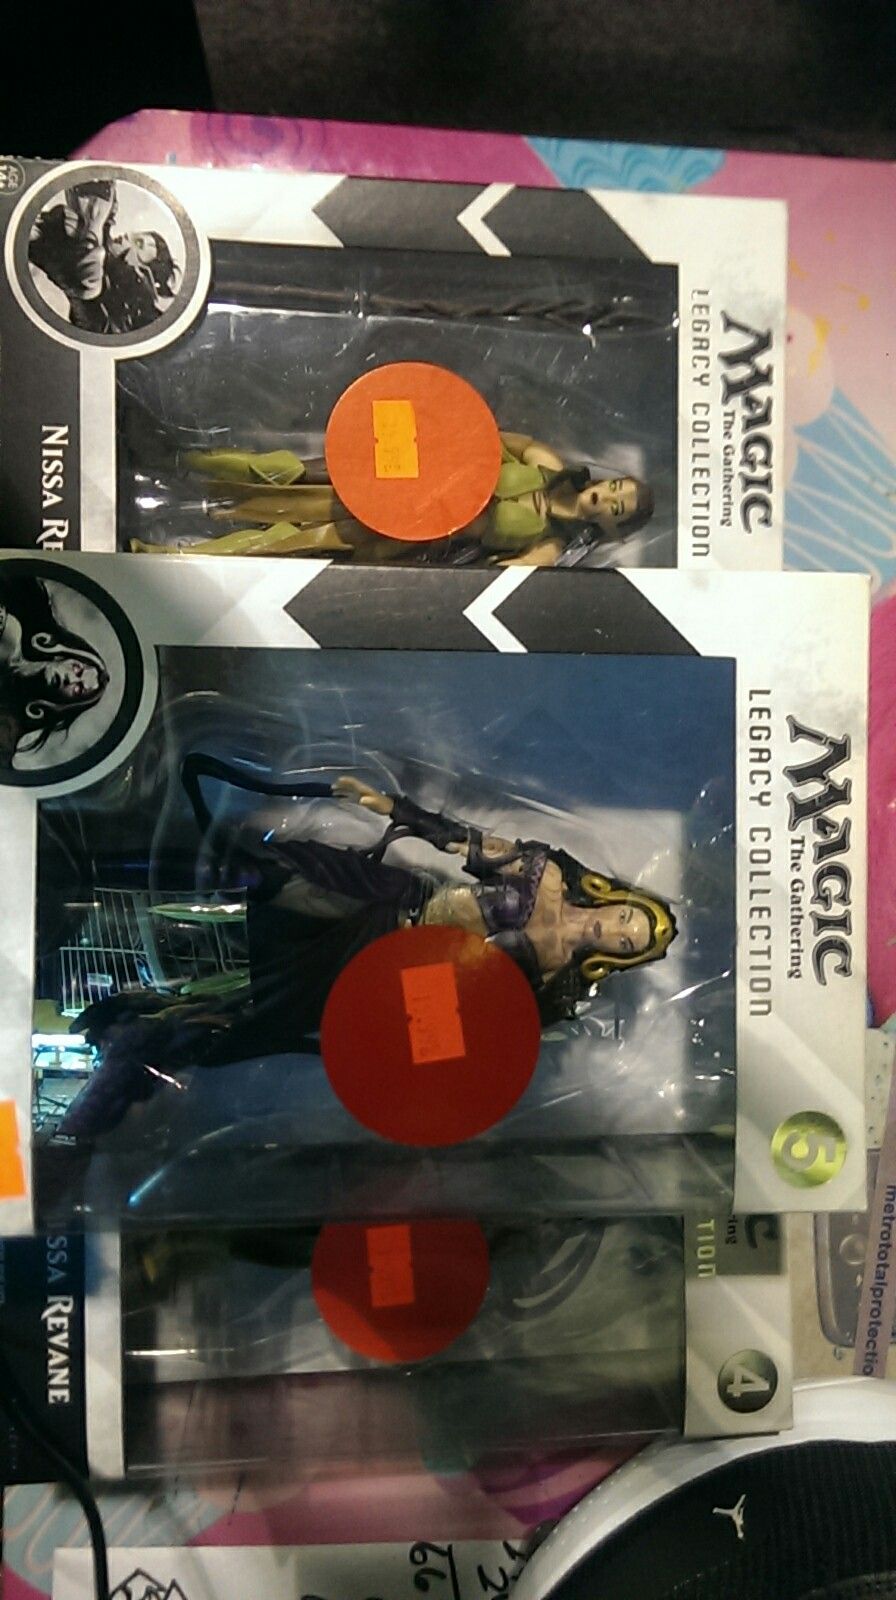 Magic the Gathering Legacy Collection featuring two boxes of Liliana vess and one box of Nissa revane